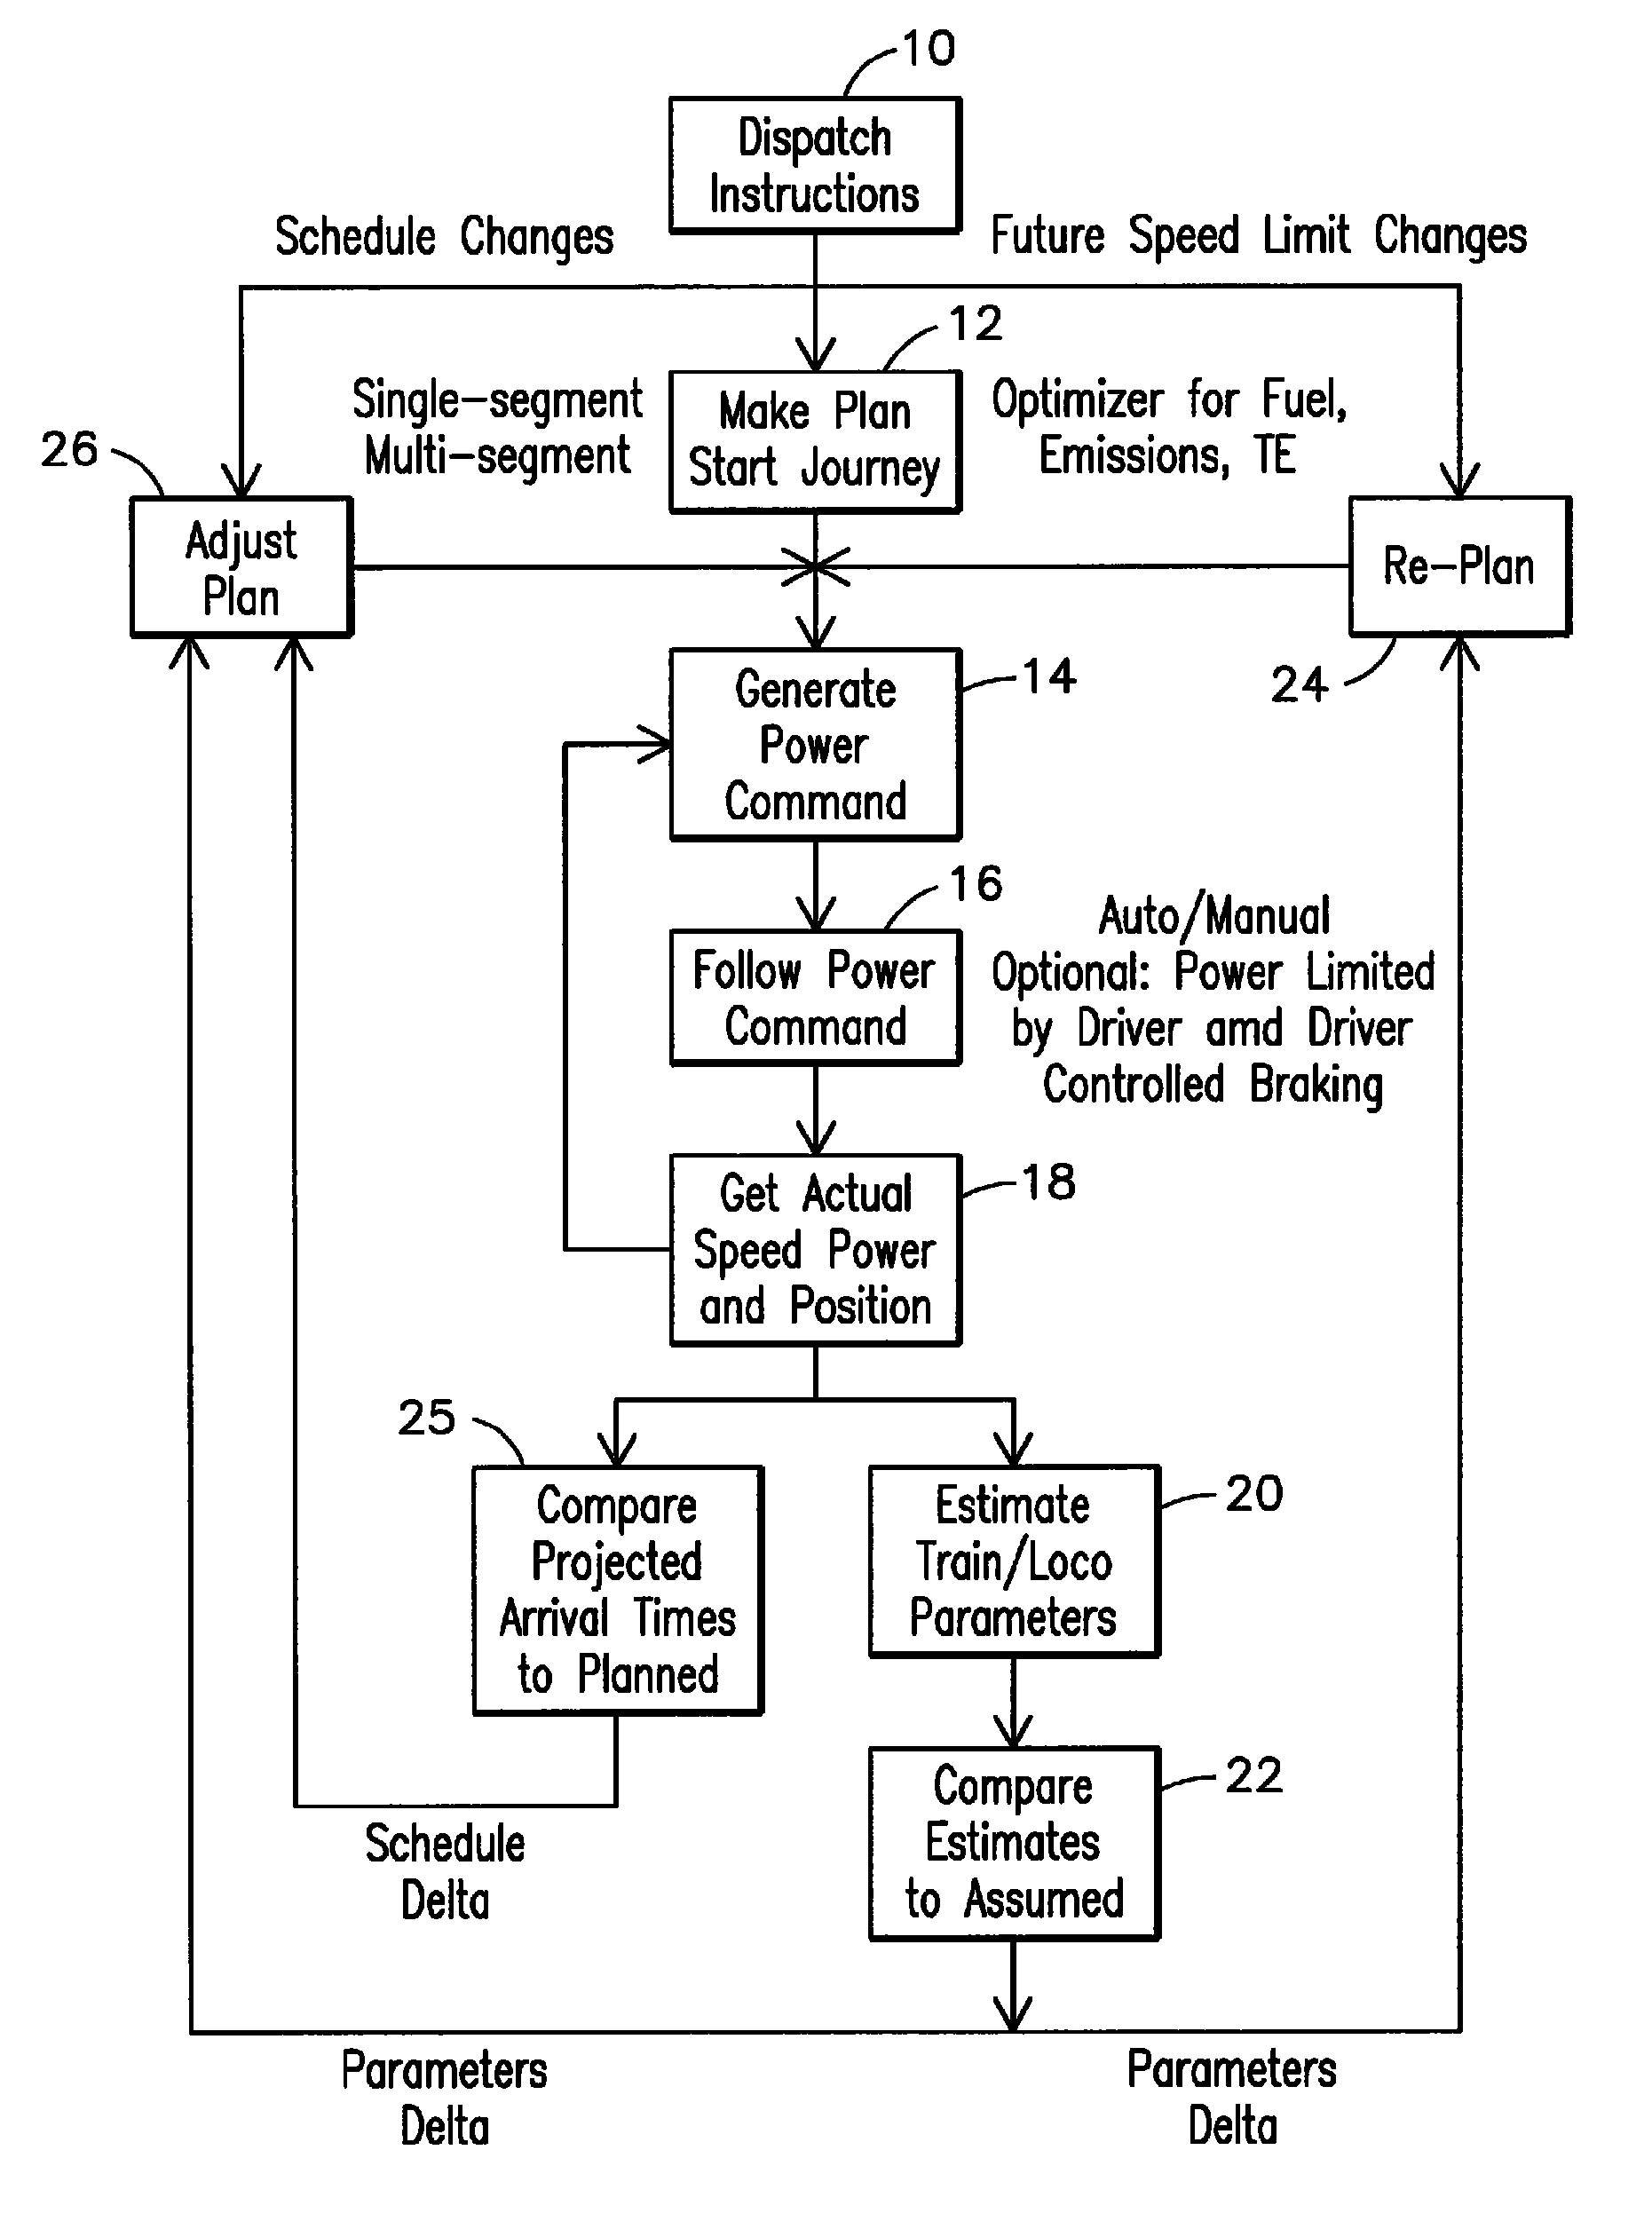 System and method for optimizing a path for a marine vessel through a waterway